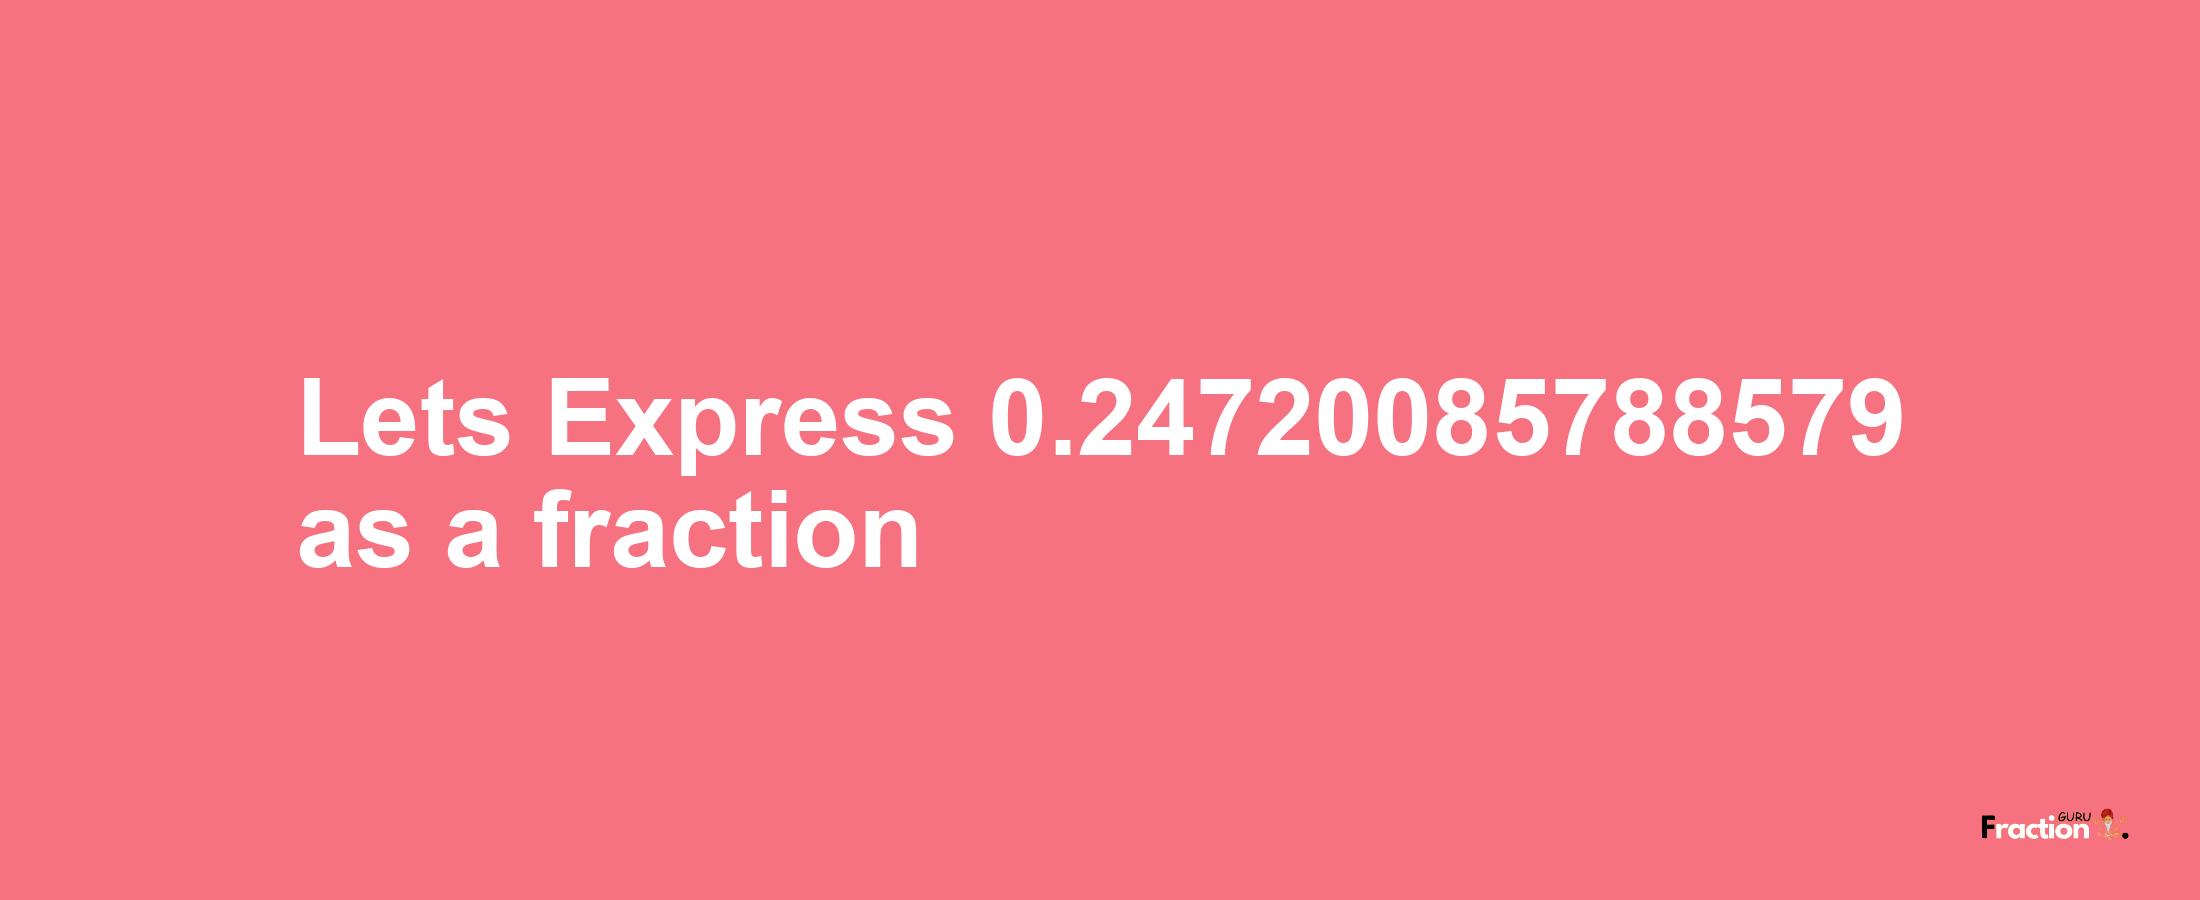 Lets Express 0.24720085788579 as afraction